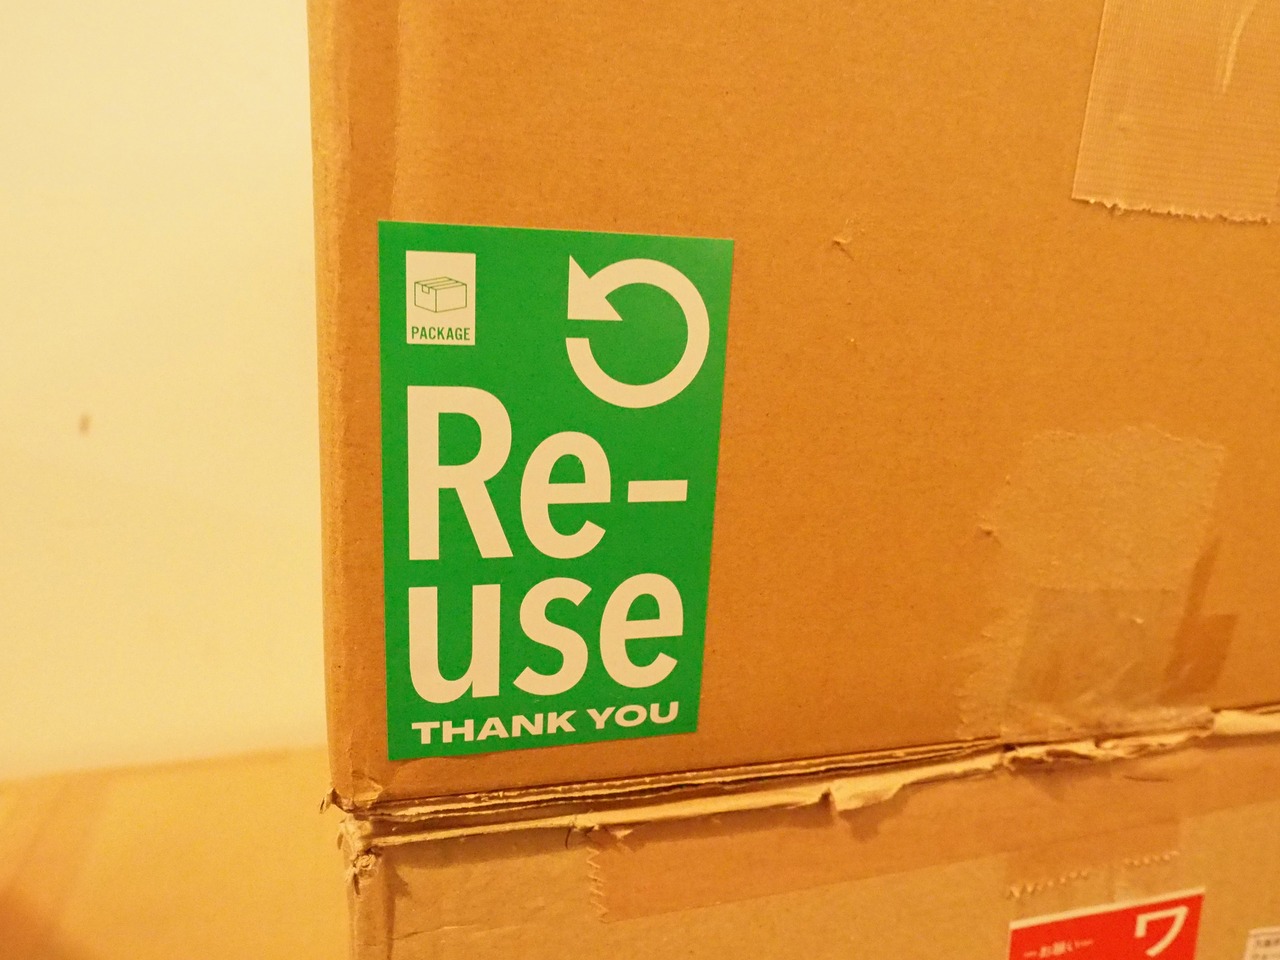 『Re-use Package』ステッカー（大容量５００枚入）